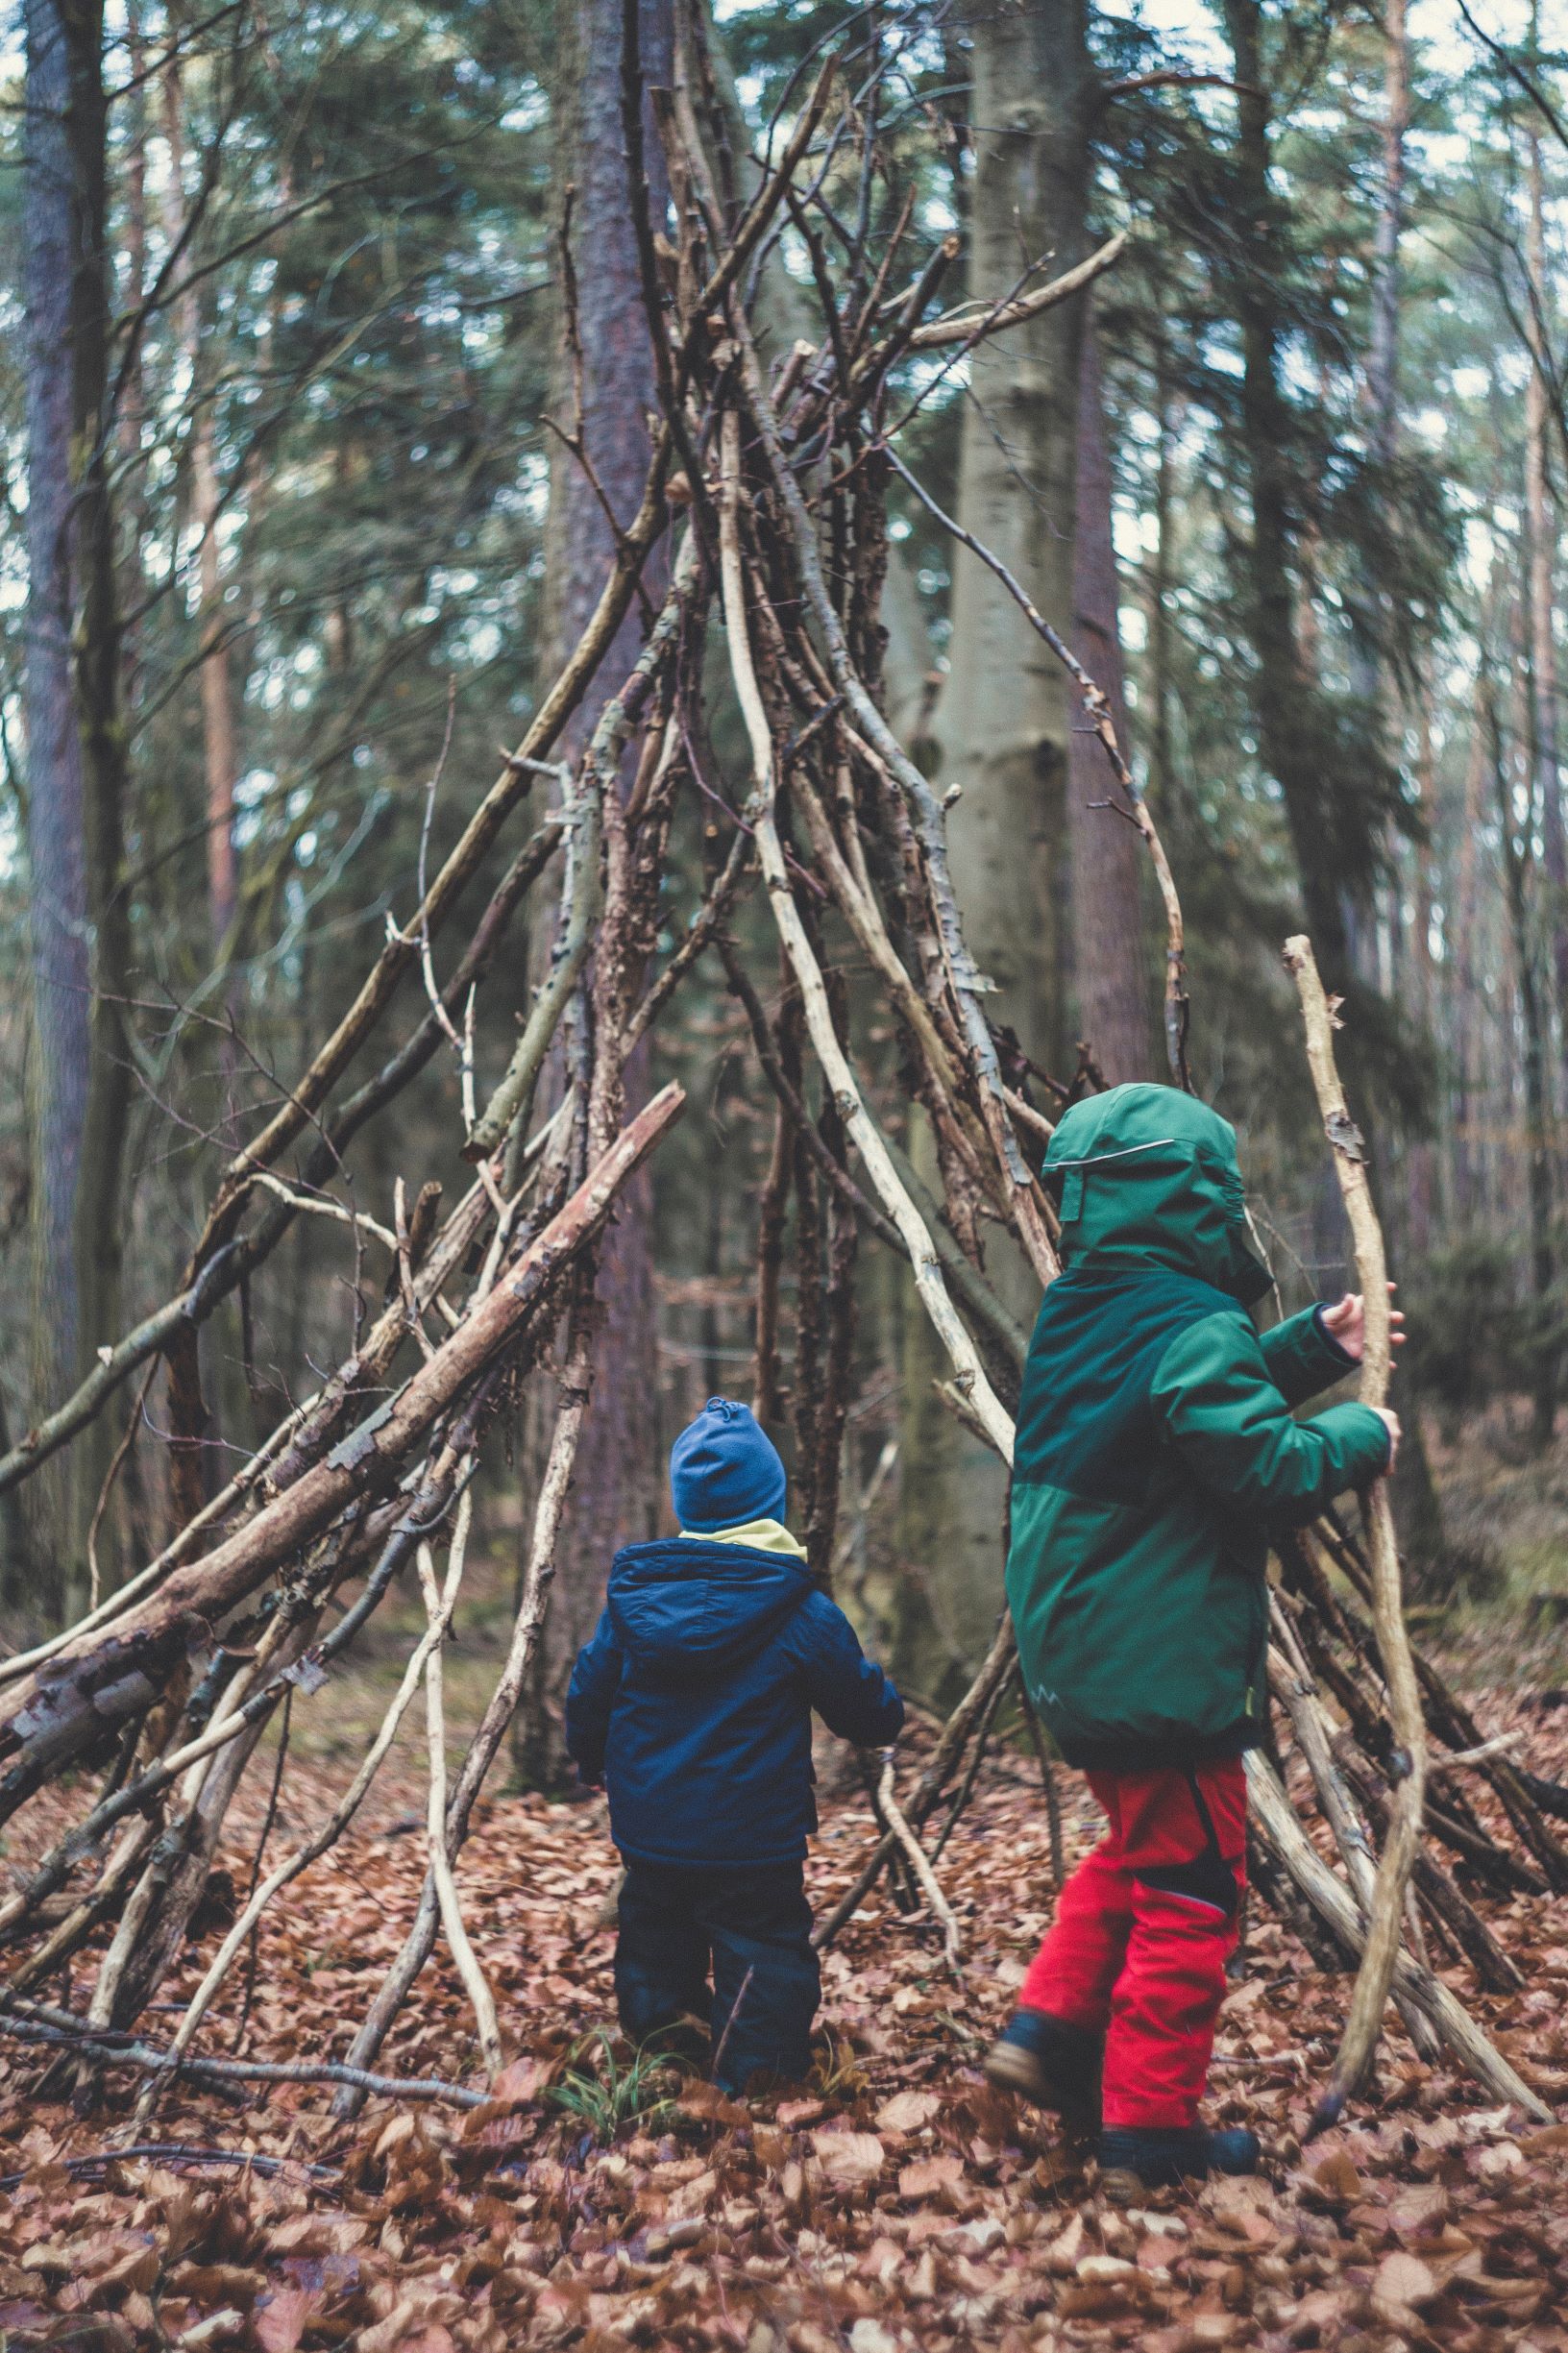 Two children building a fort from sticks, similar to how children build language and literacy skills stick by stick.